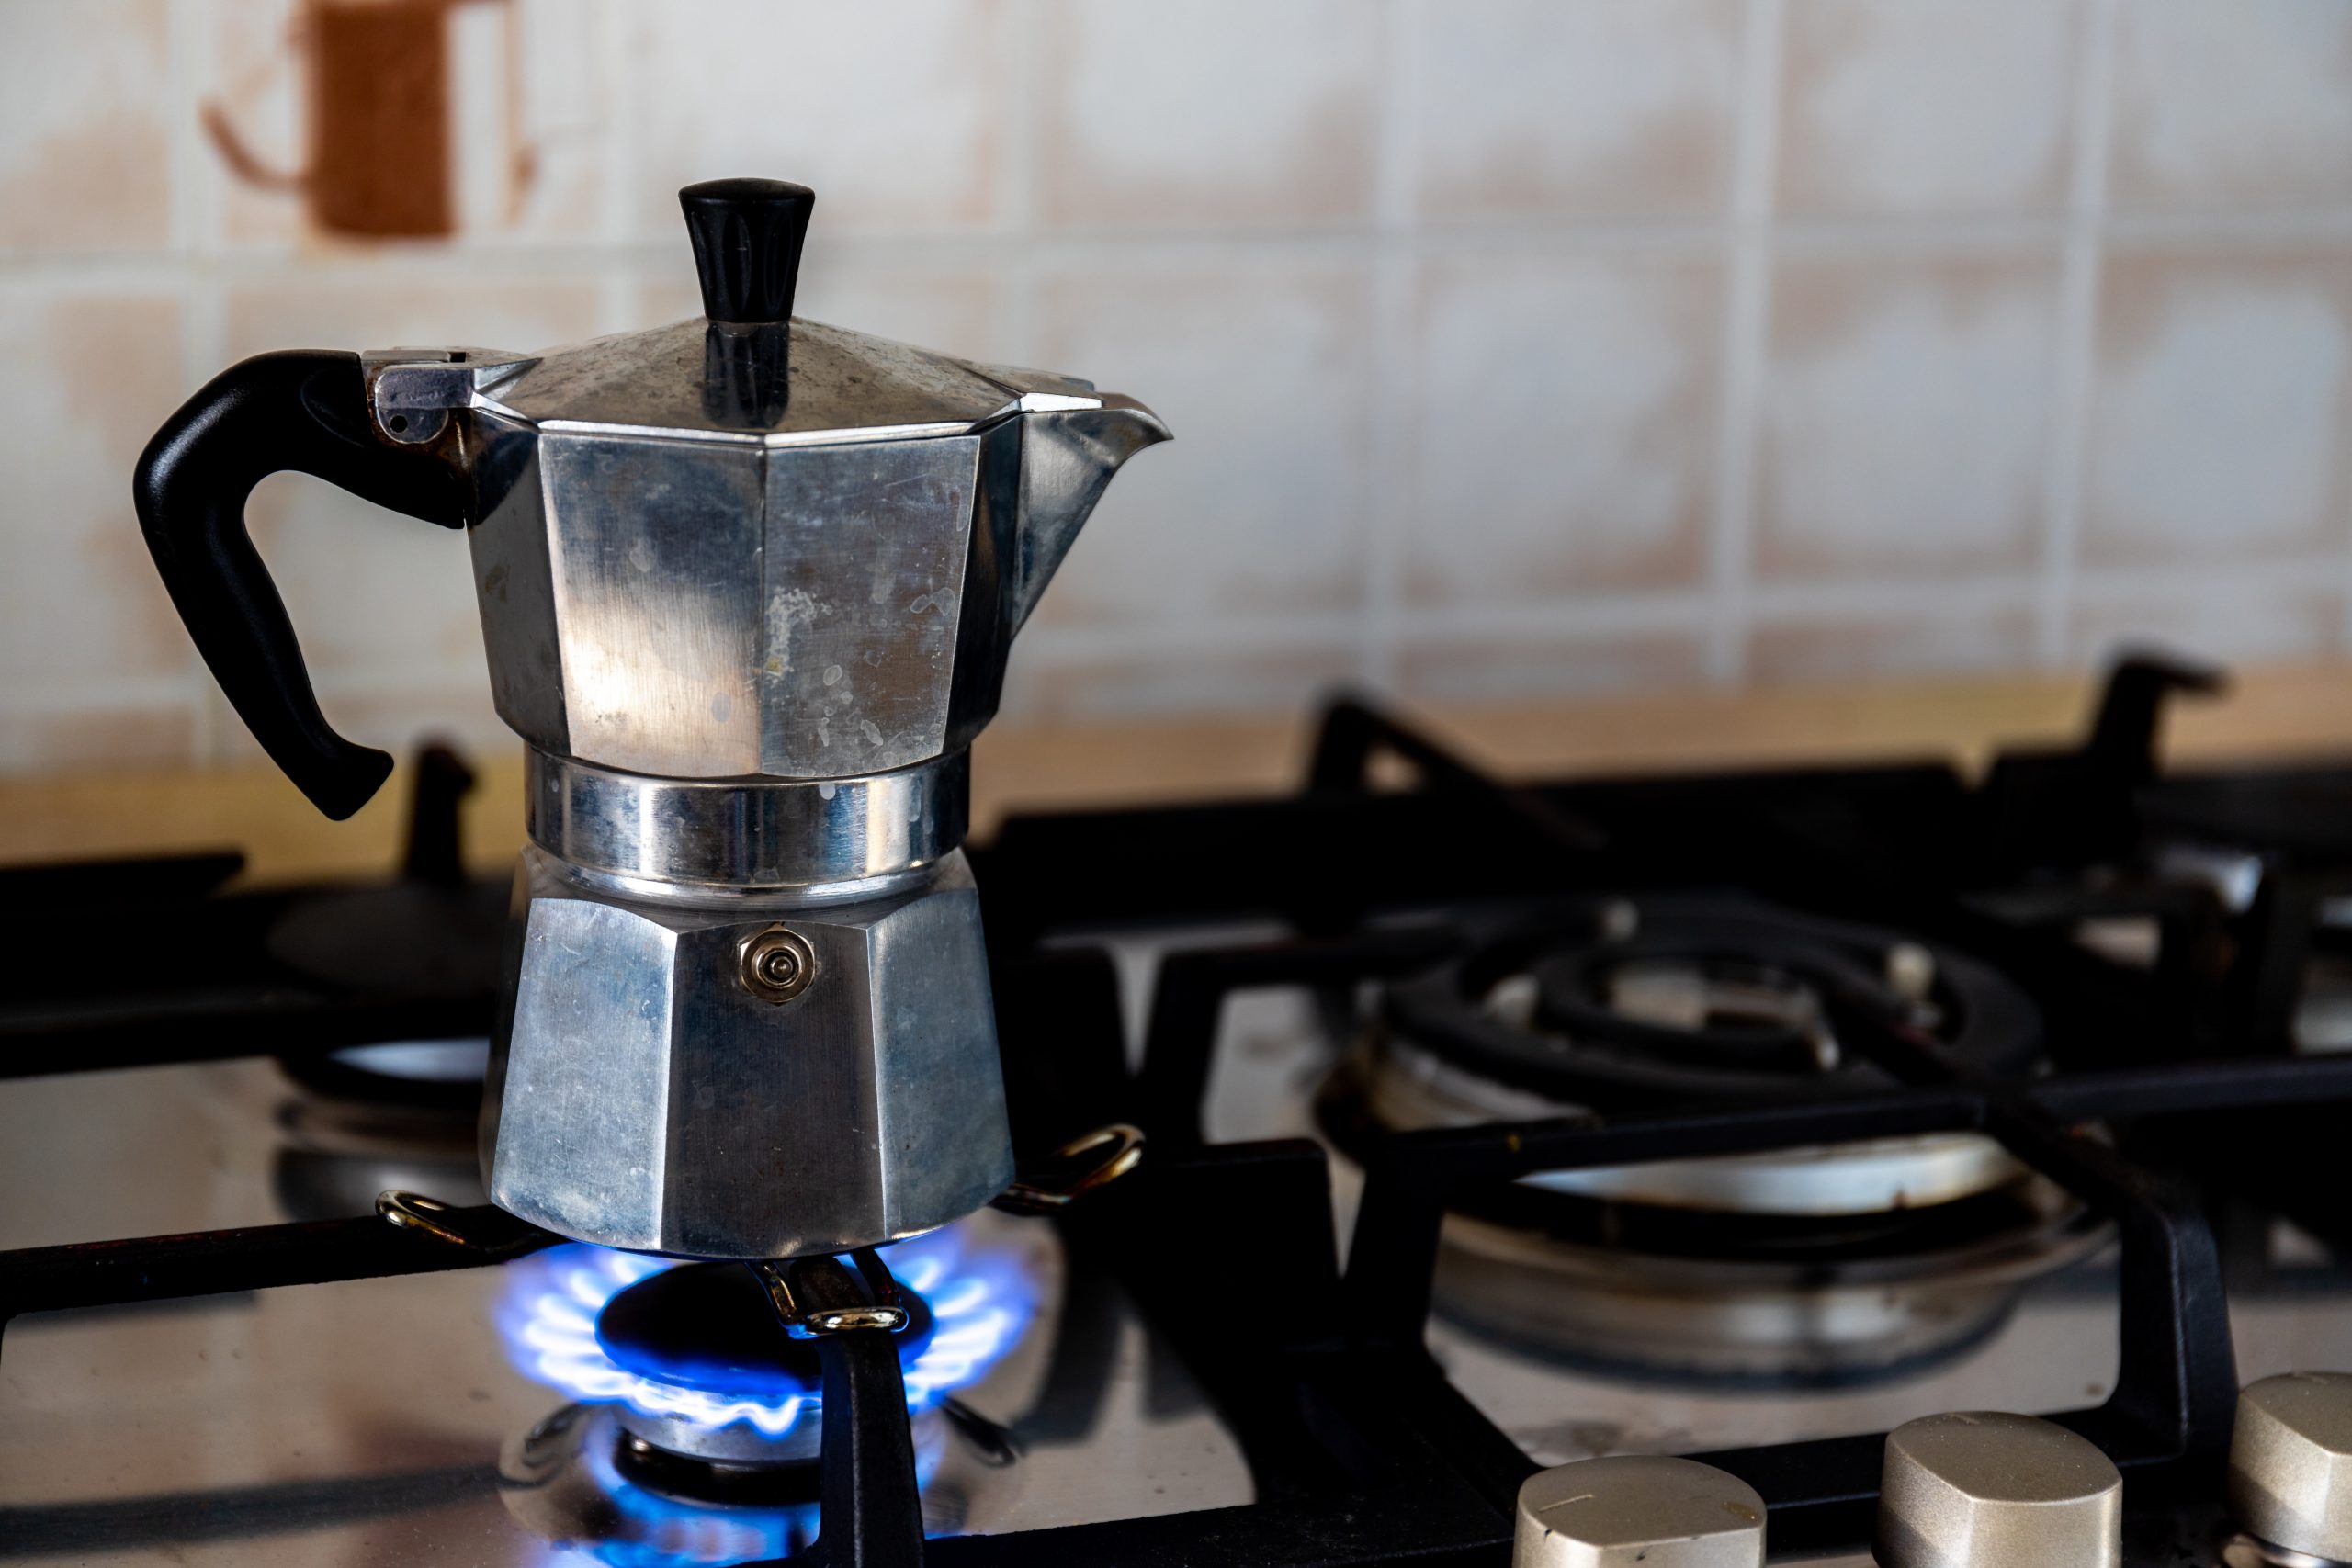 This stovetop espresso maker has thousands of 5-star reviews on